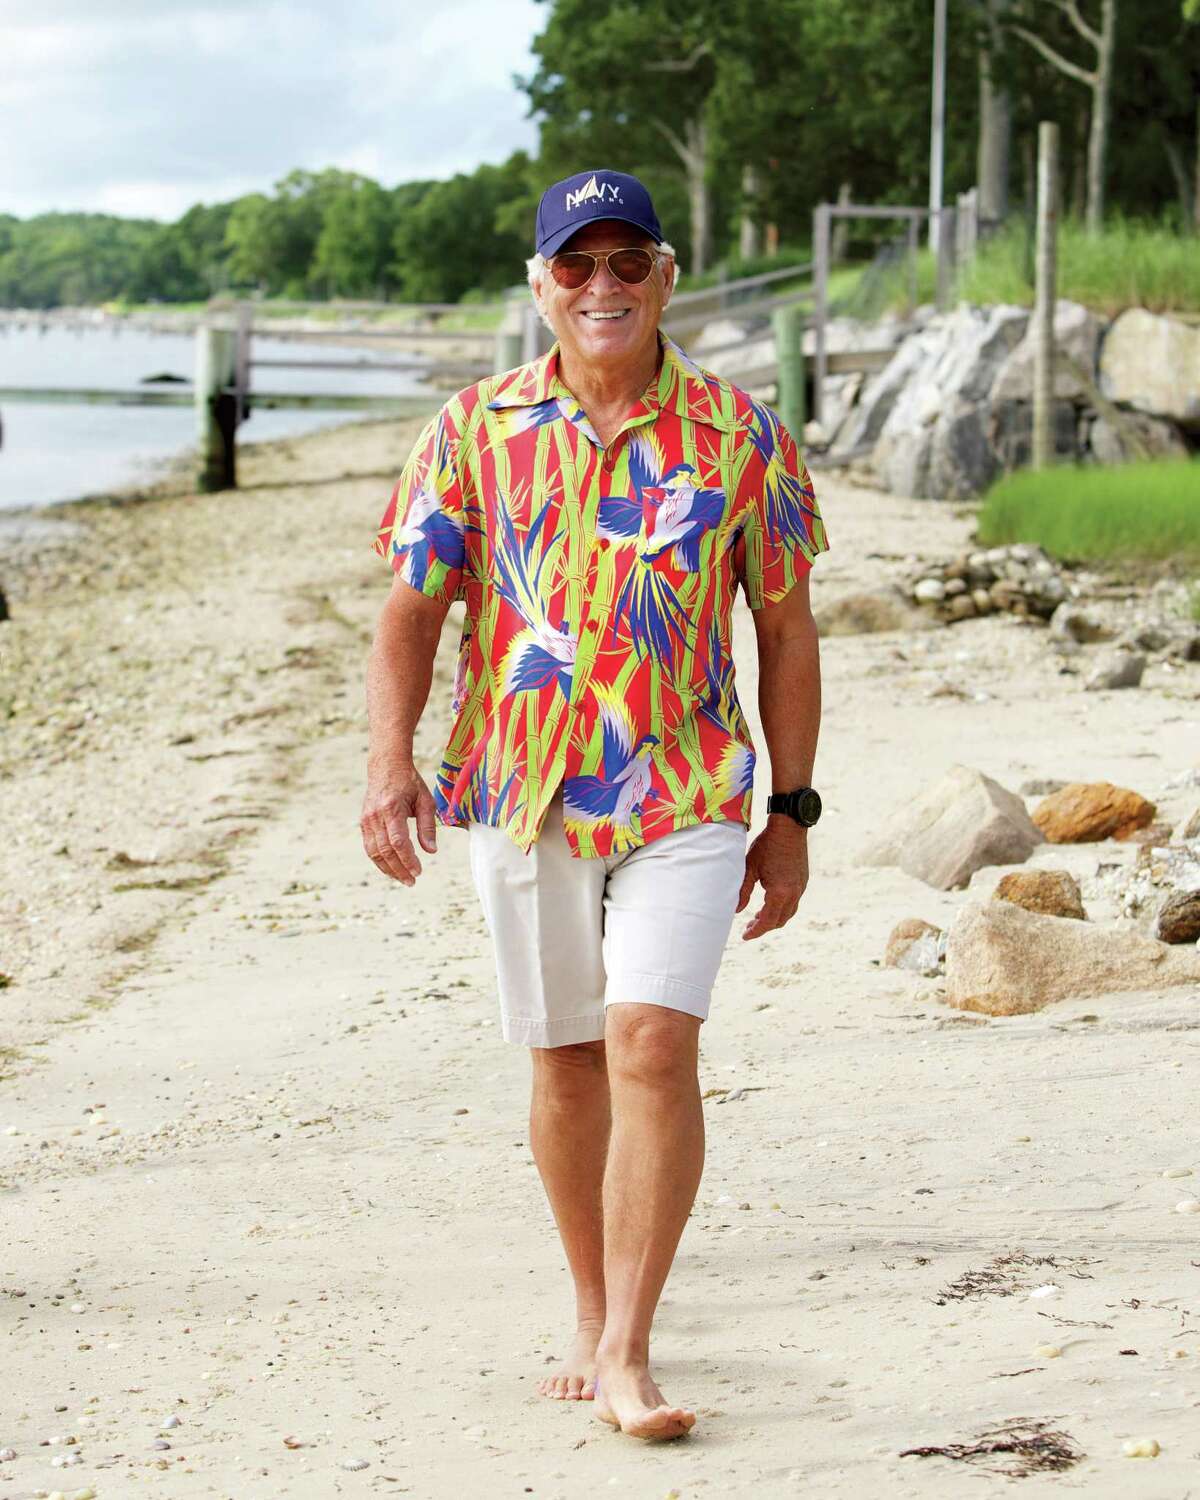 Jimmy Buffett performs in the Woodlands in 2020.